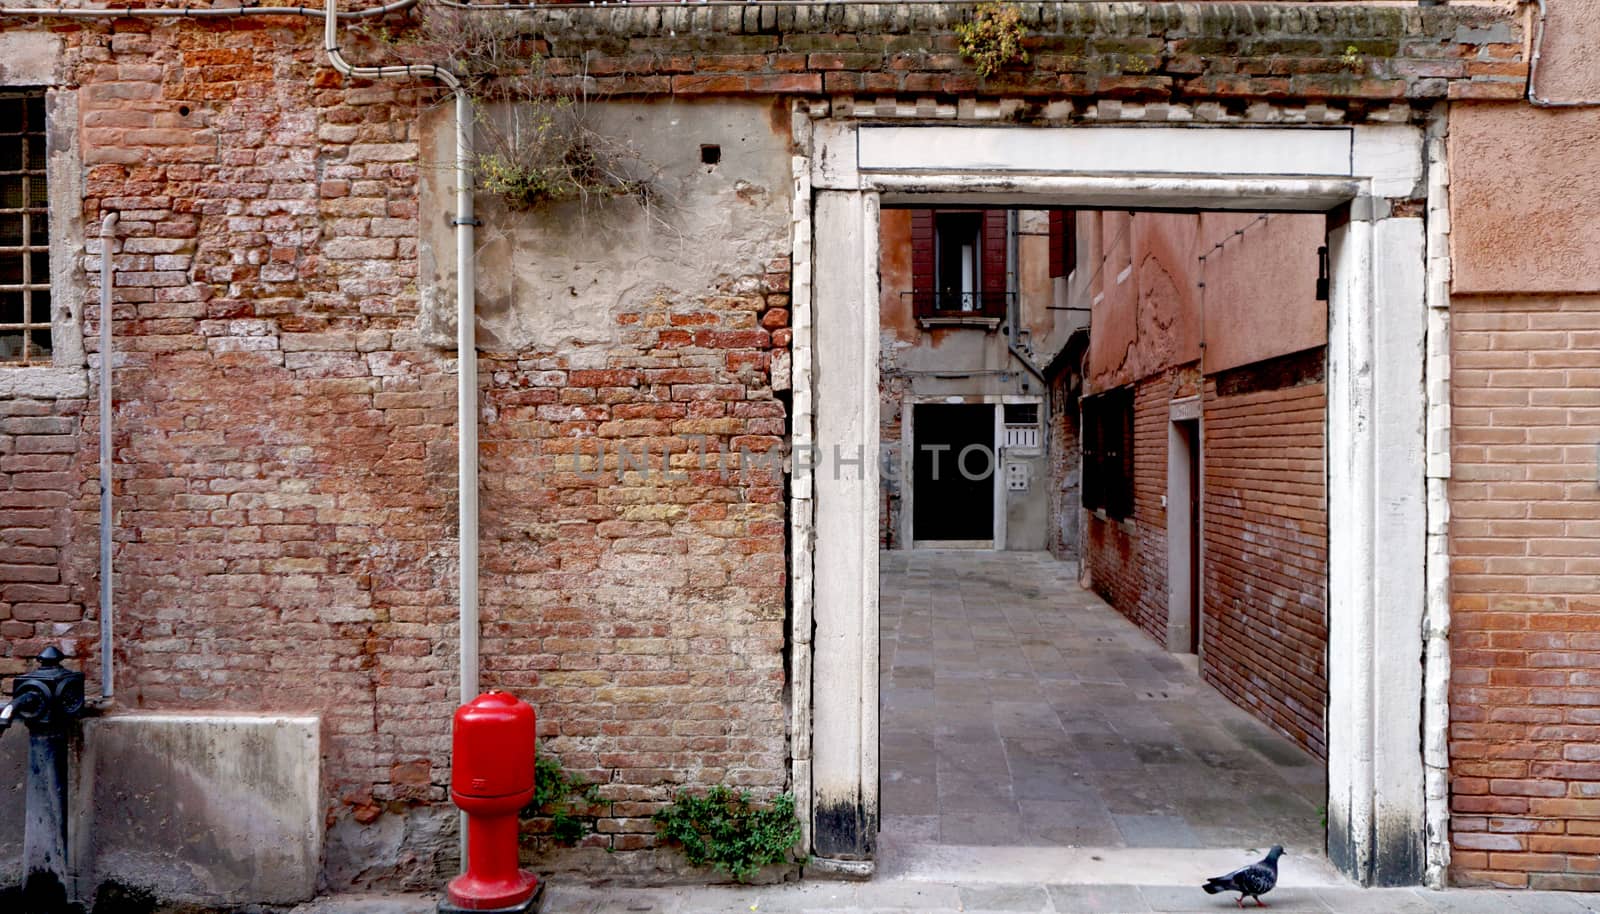 Alley with ancient brick wall building in Venice, Italy